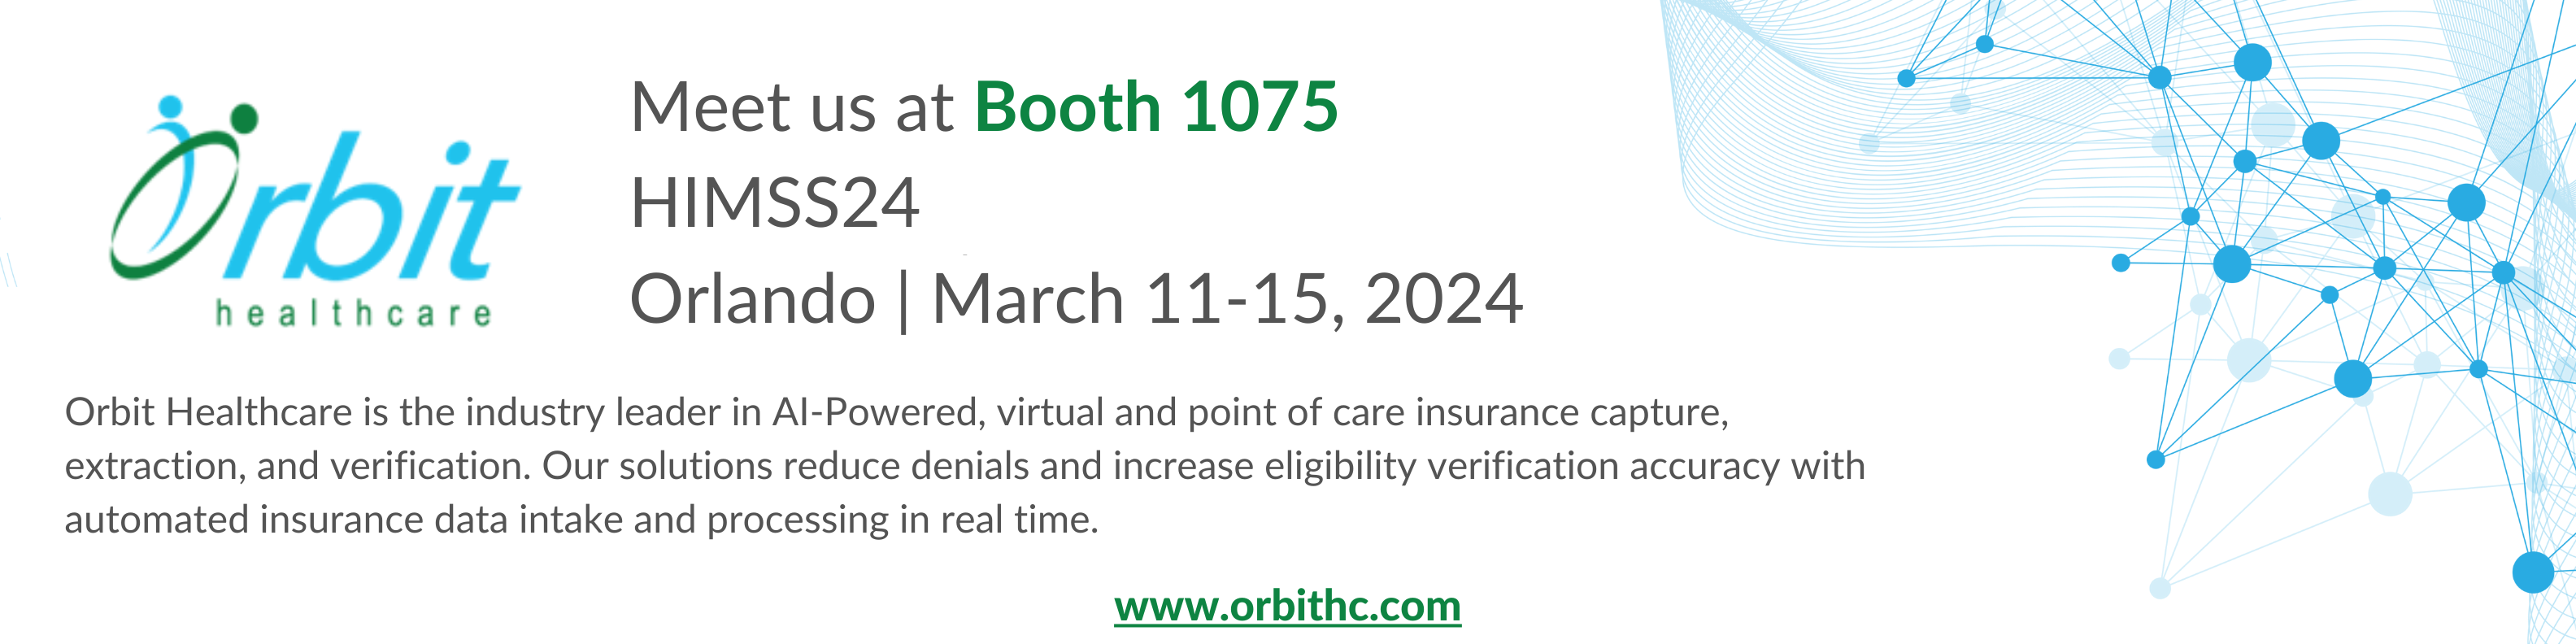 Orbit Healthcare at HIMSS Booth 1075